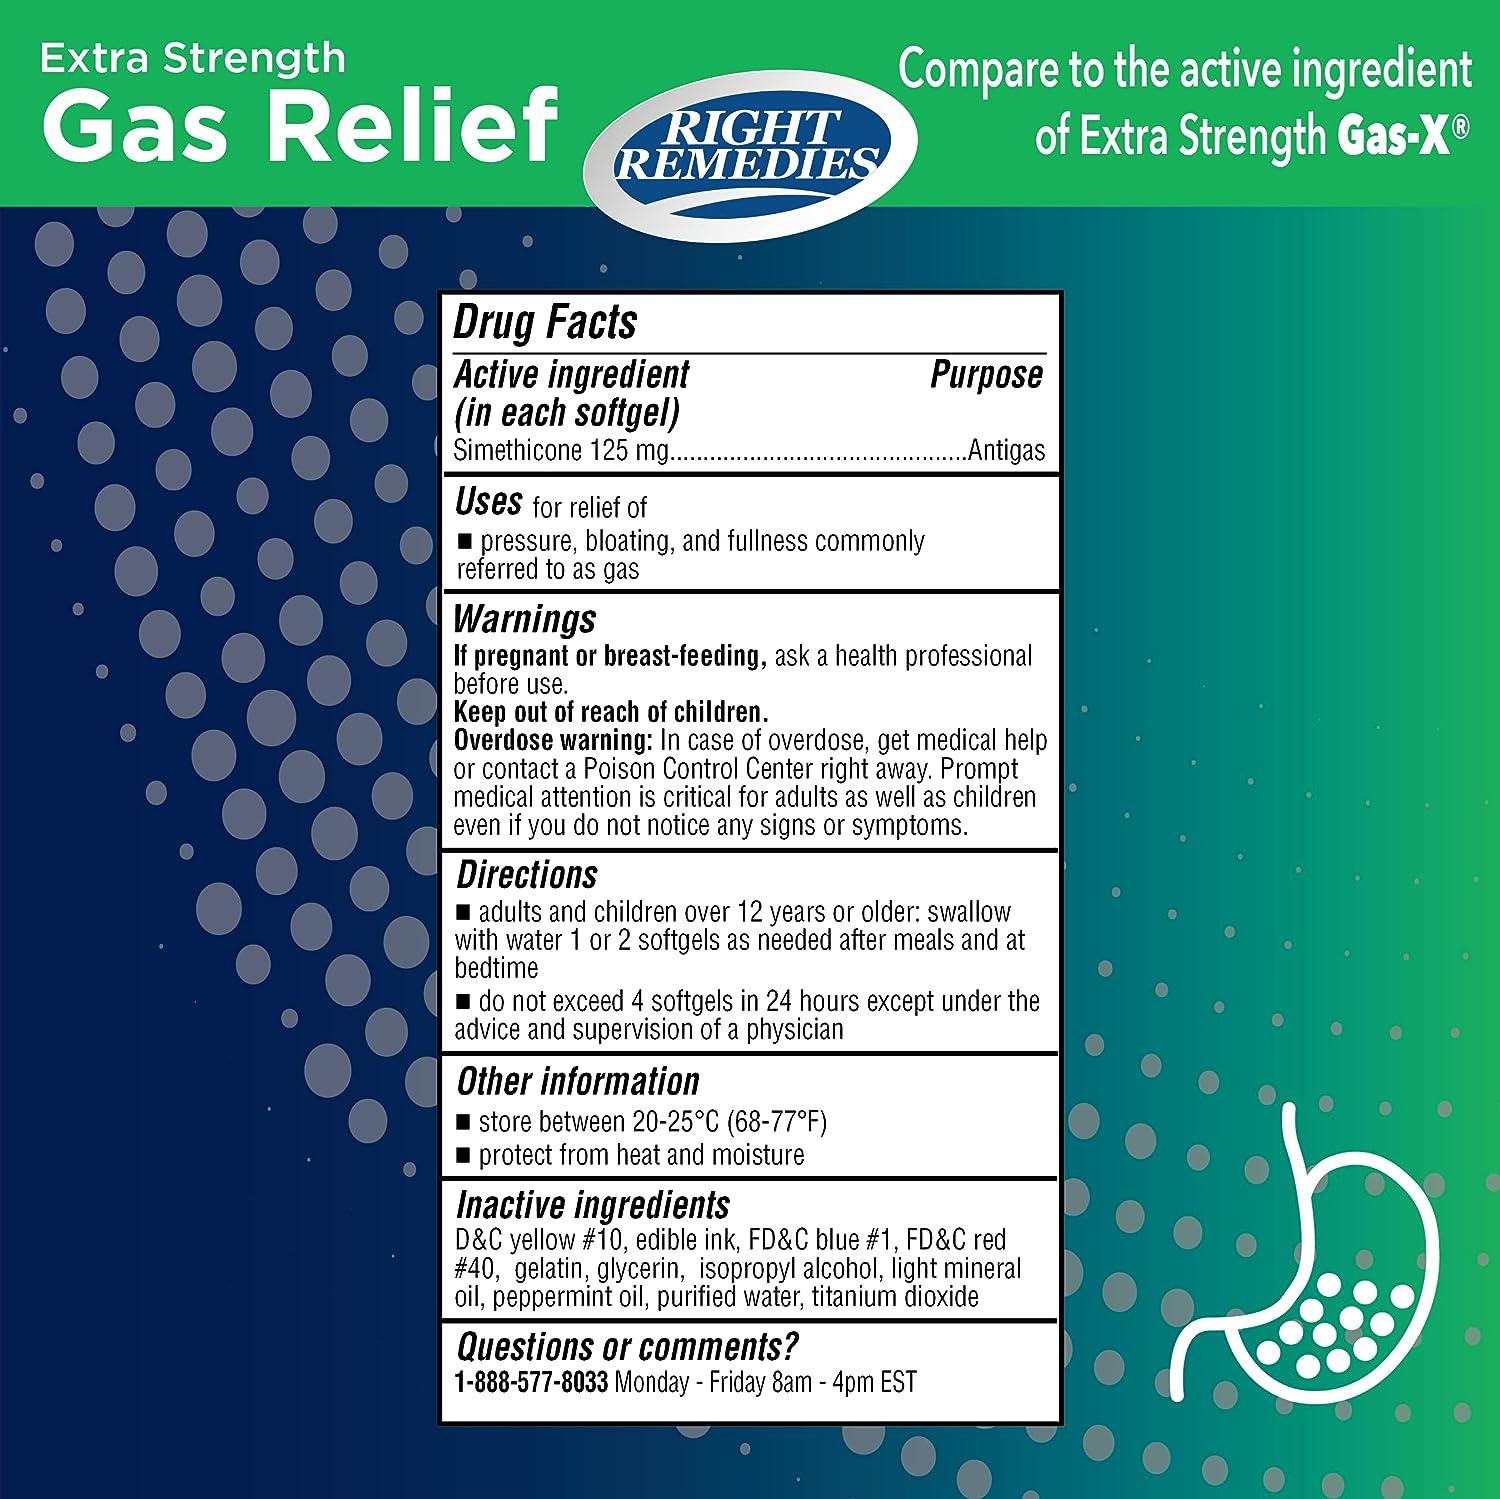 RIGHT REMEDIES Gas Relief Simethicone 125 mg (365 Softgels) Fast Relief  from Gas Bloating Fullness Painful discomfort Compare to Gas-X Extra  Strength Active Ingredient